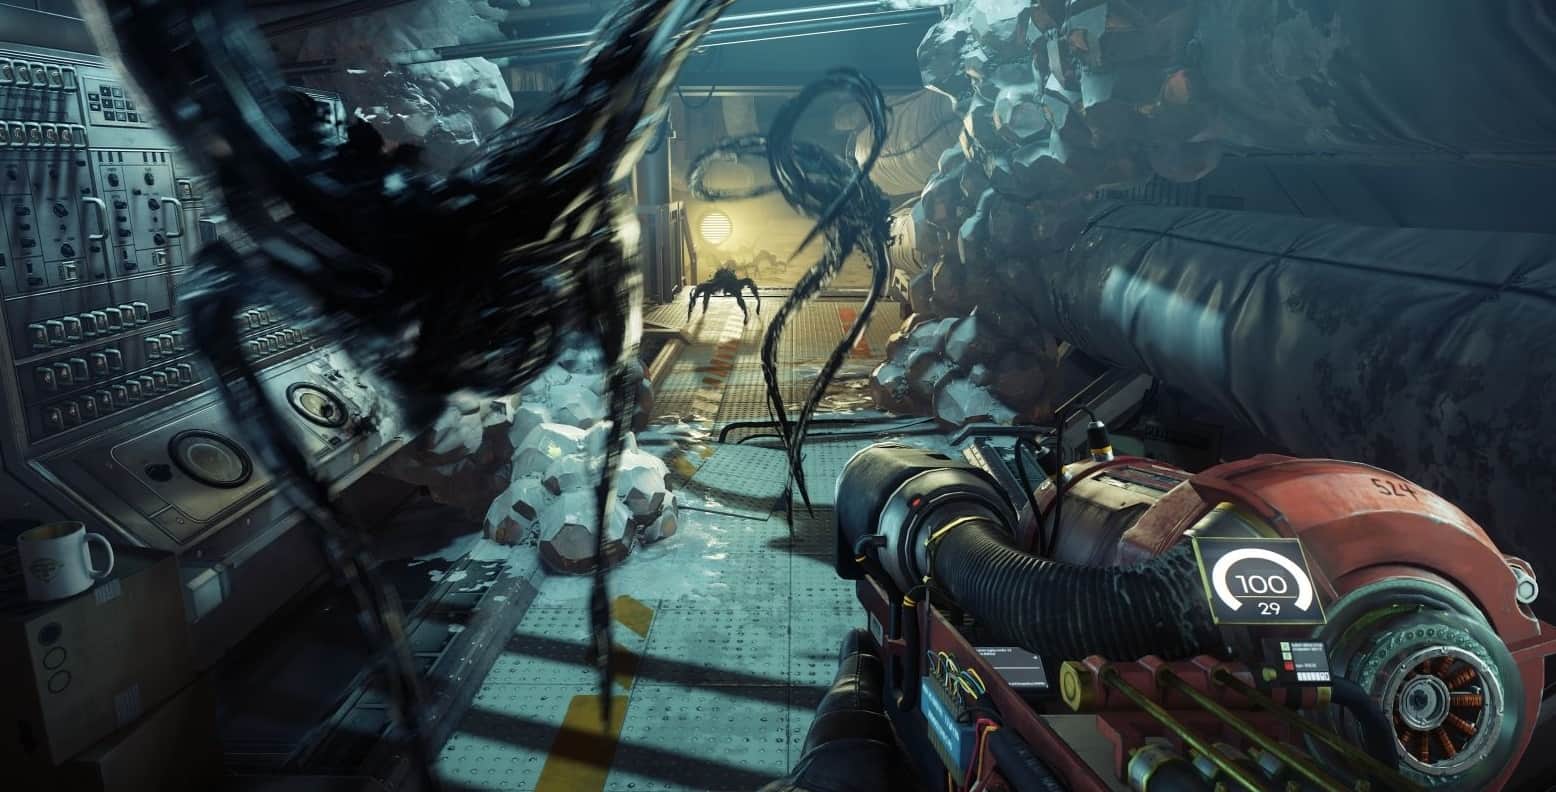 BioShock In Space Game Released by 2K Games You Must Play